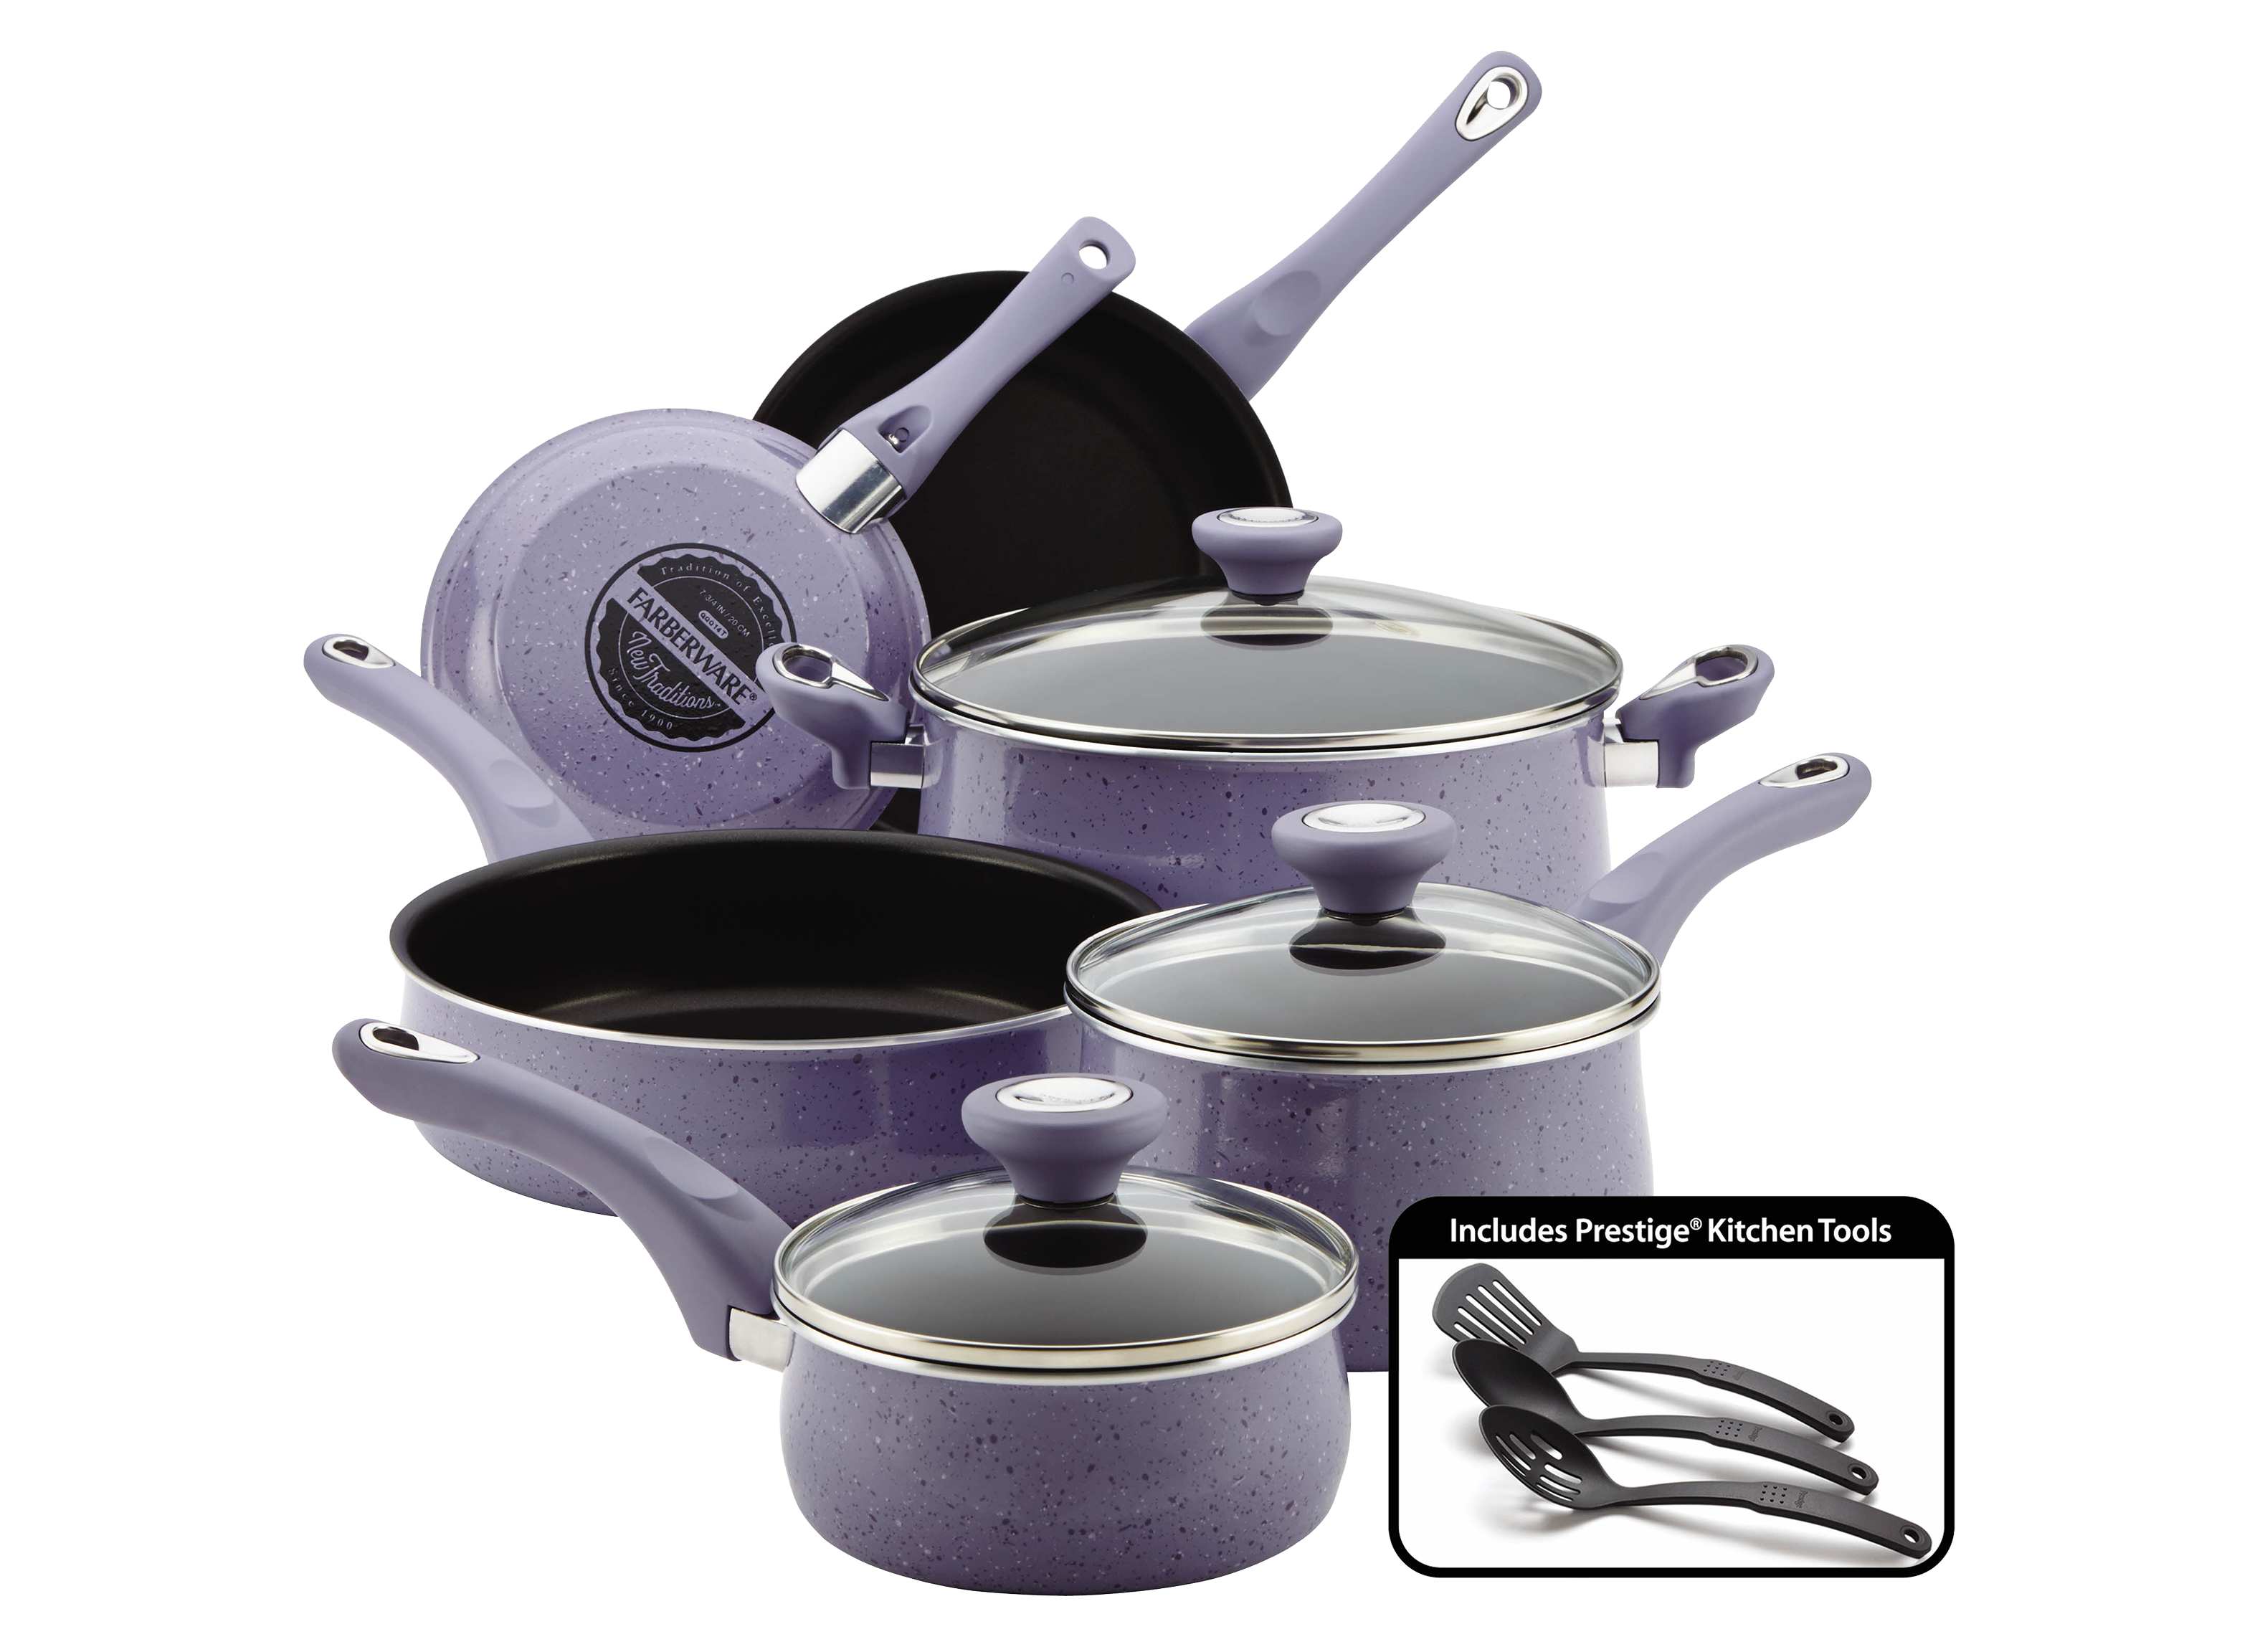 https://crdms.images.consumerreports.org/prod/products/cr/models/402094-cookware-sets-nonstick-farberware-new-traditions-10015635.png